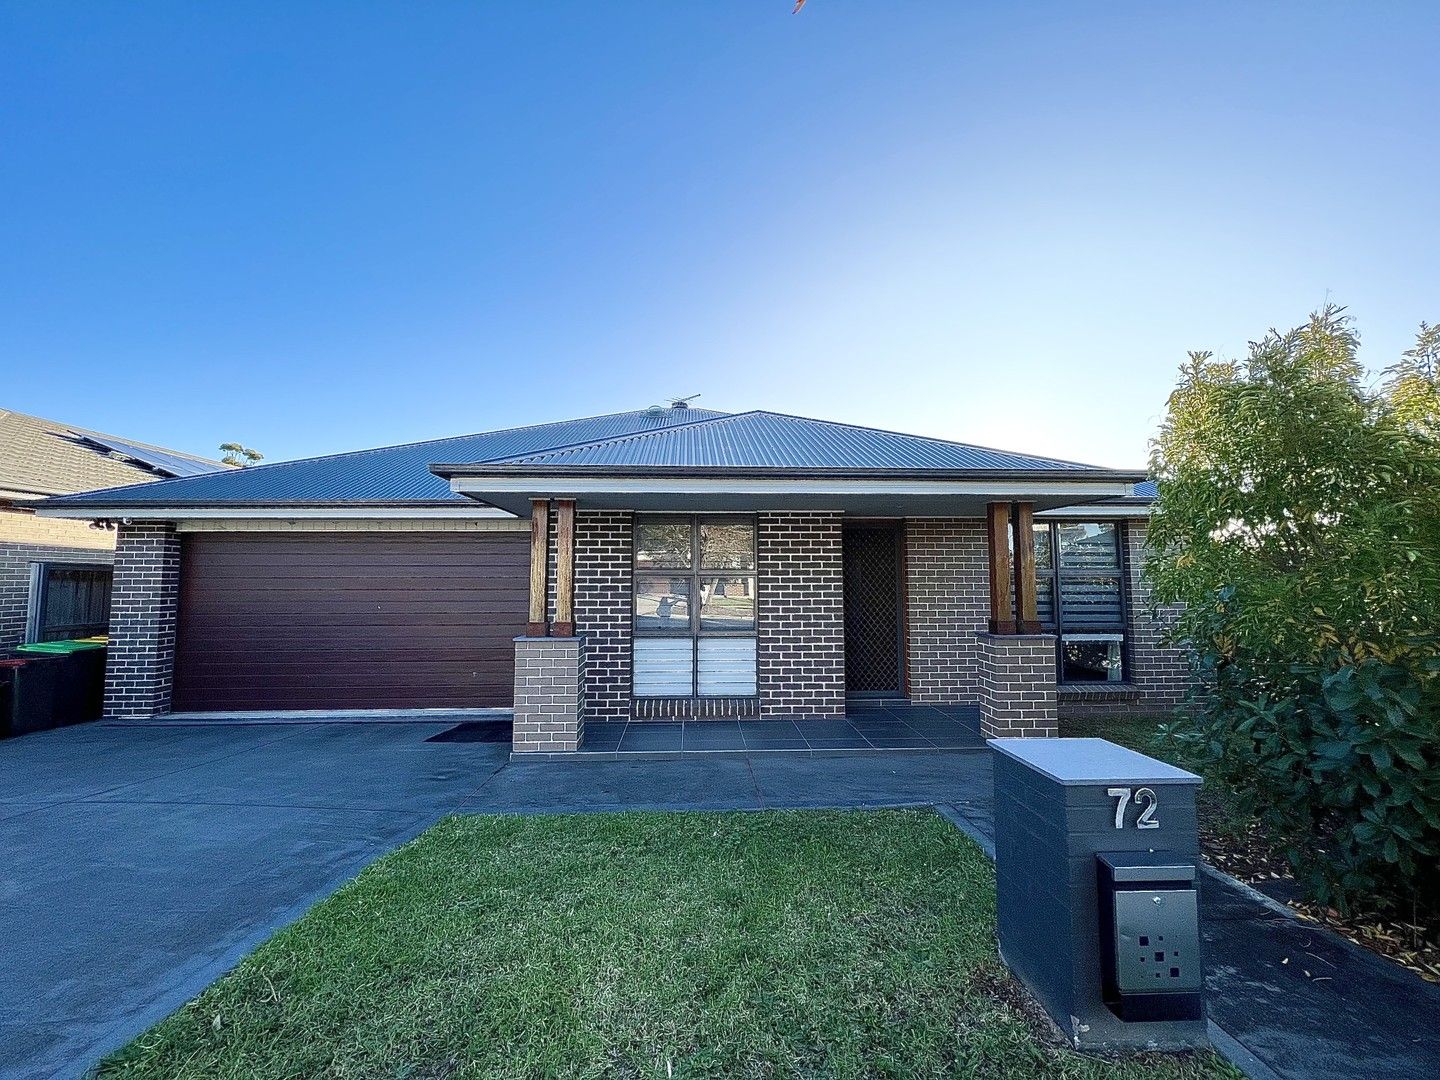 4 bedrooms House in 72 Deans Road AIRDS NSW, 2560